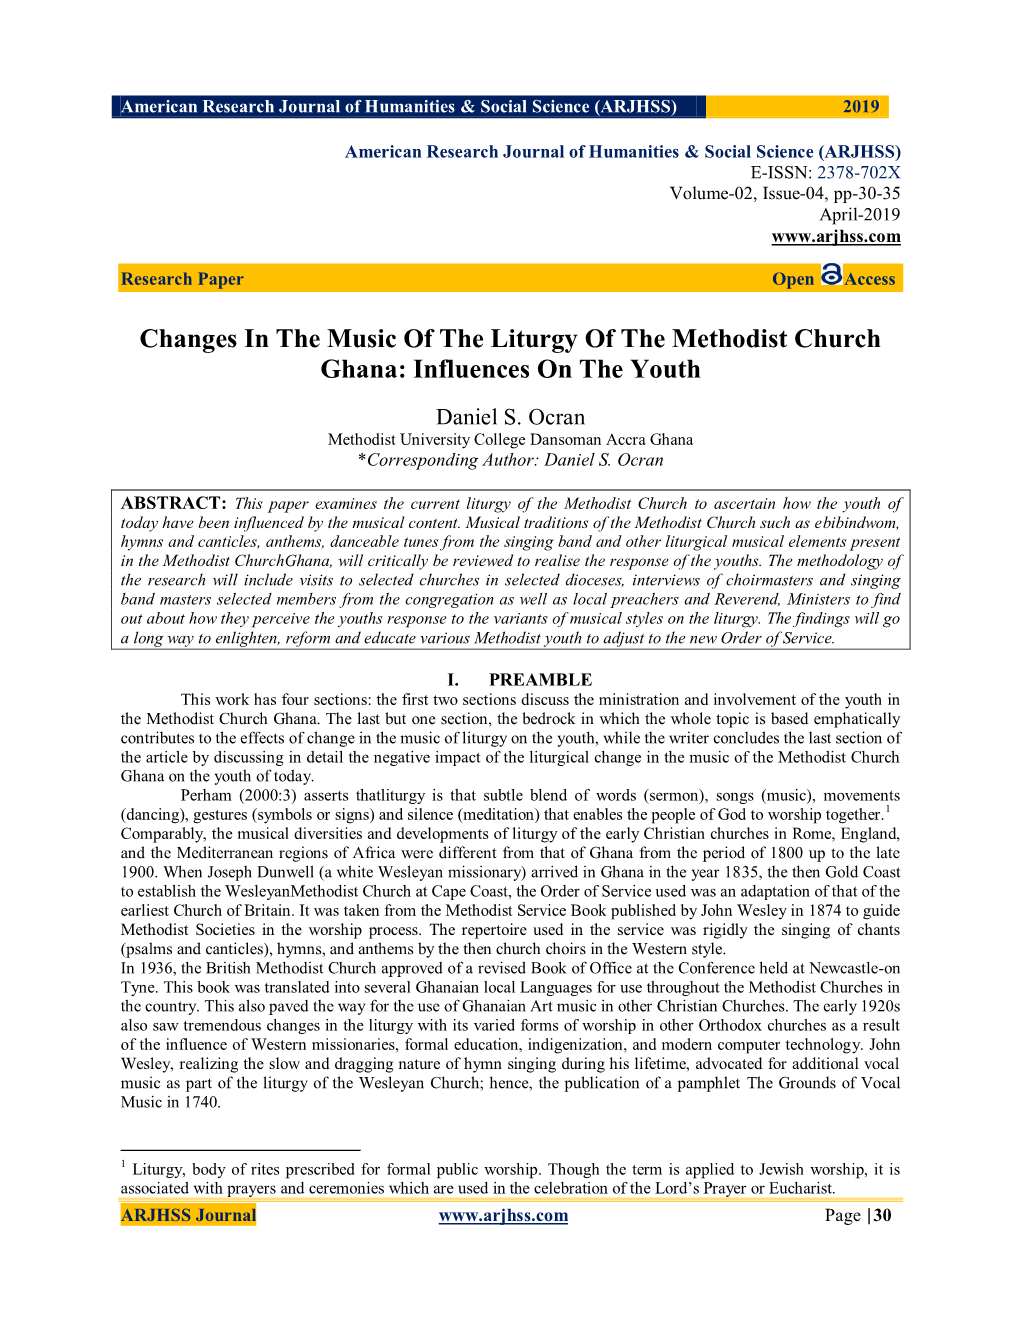 Changes in the Music of the Liturgy of the Methodist Church Ghana: Influences on the Youth